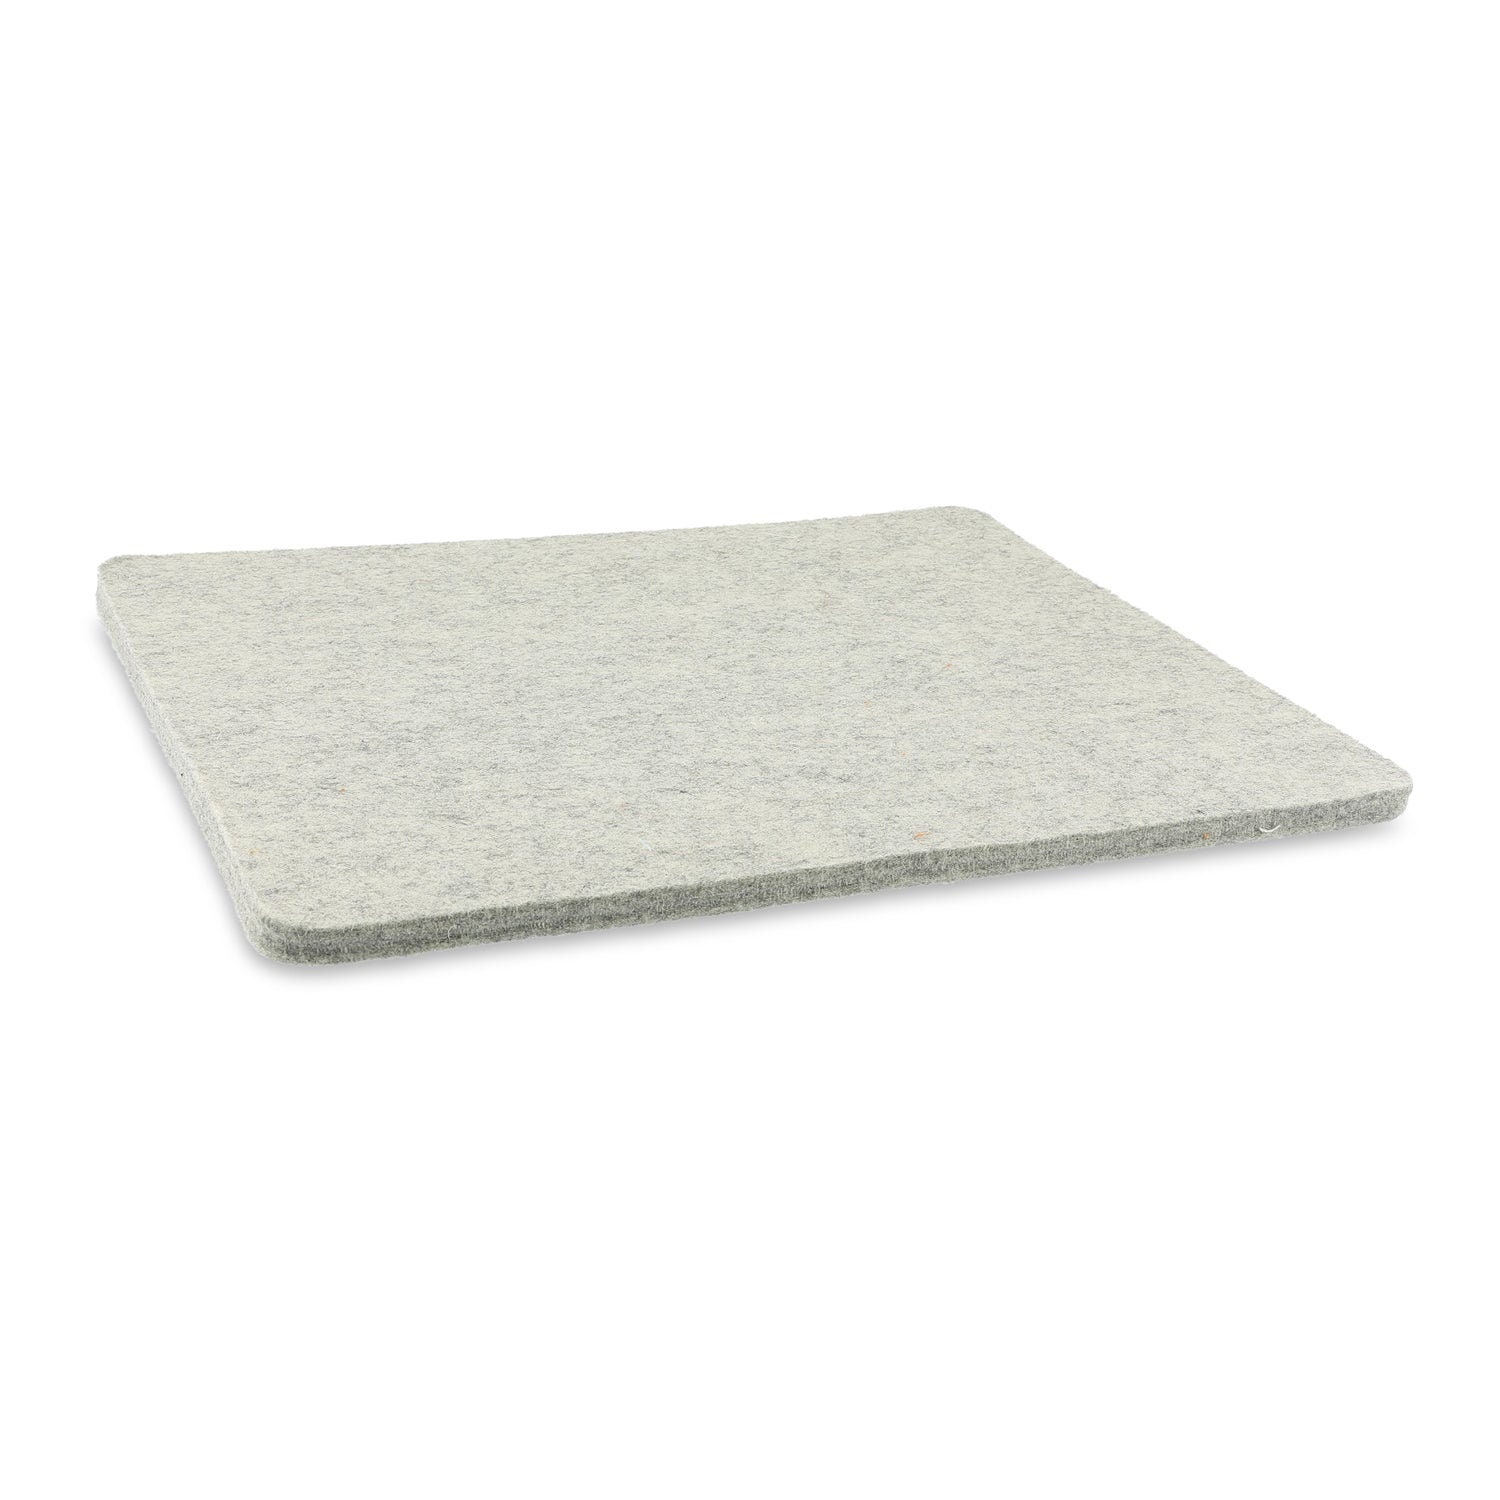 Wooly Felt Easy Press Ironing Pad for Quilters, DIY Embroidery Crafts,  Portable Felted Wool Ironing Mat - China Ironing Mat and Ironing Pad price